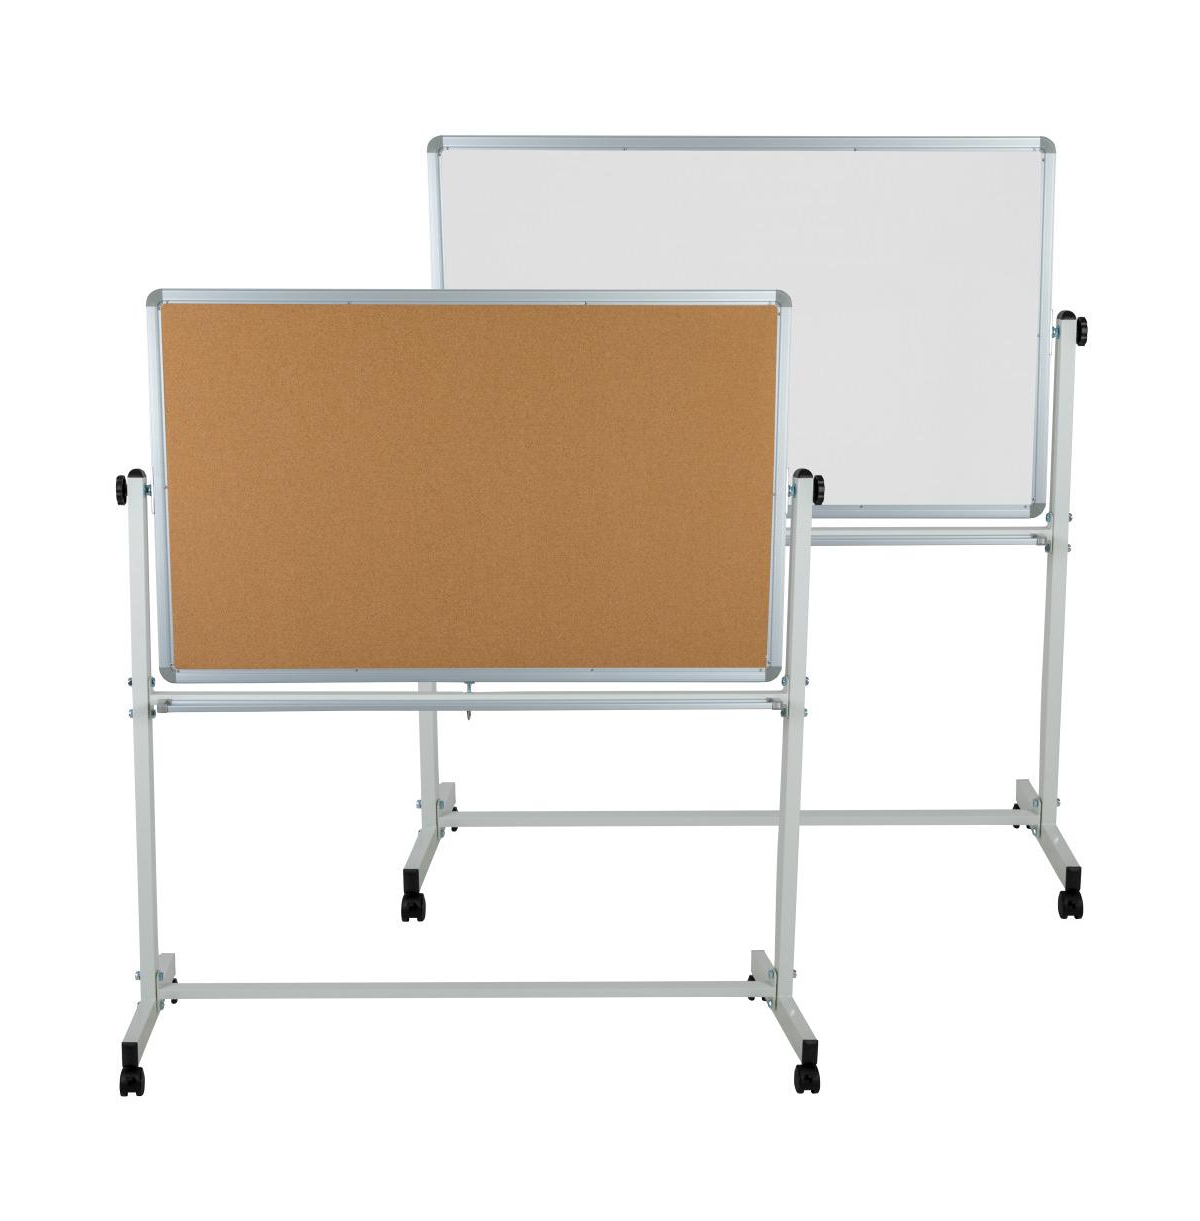 Reversible Mobile Cork Bulletin Board And White Board Stand With Pen Tray - Natural/white